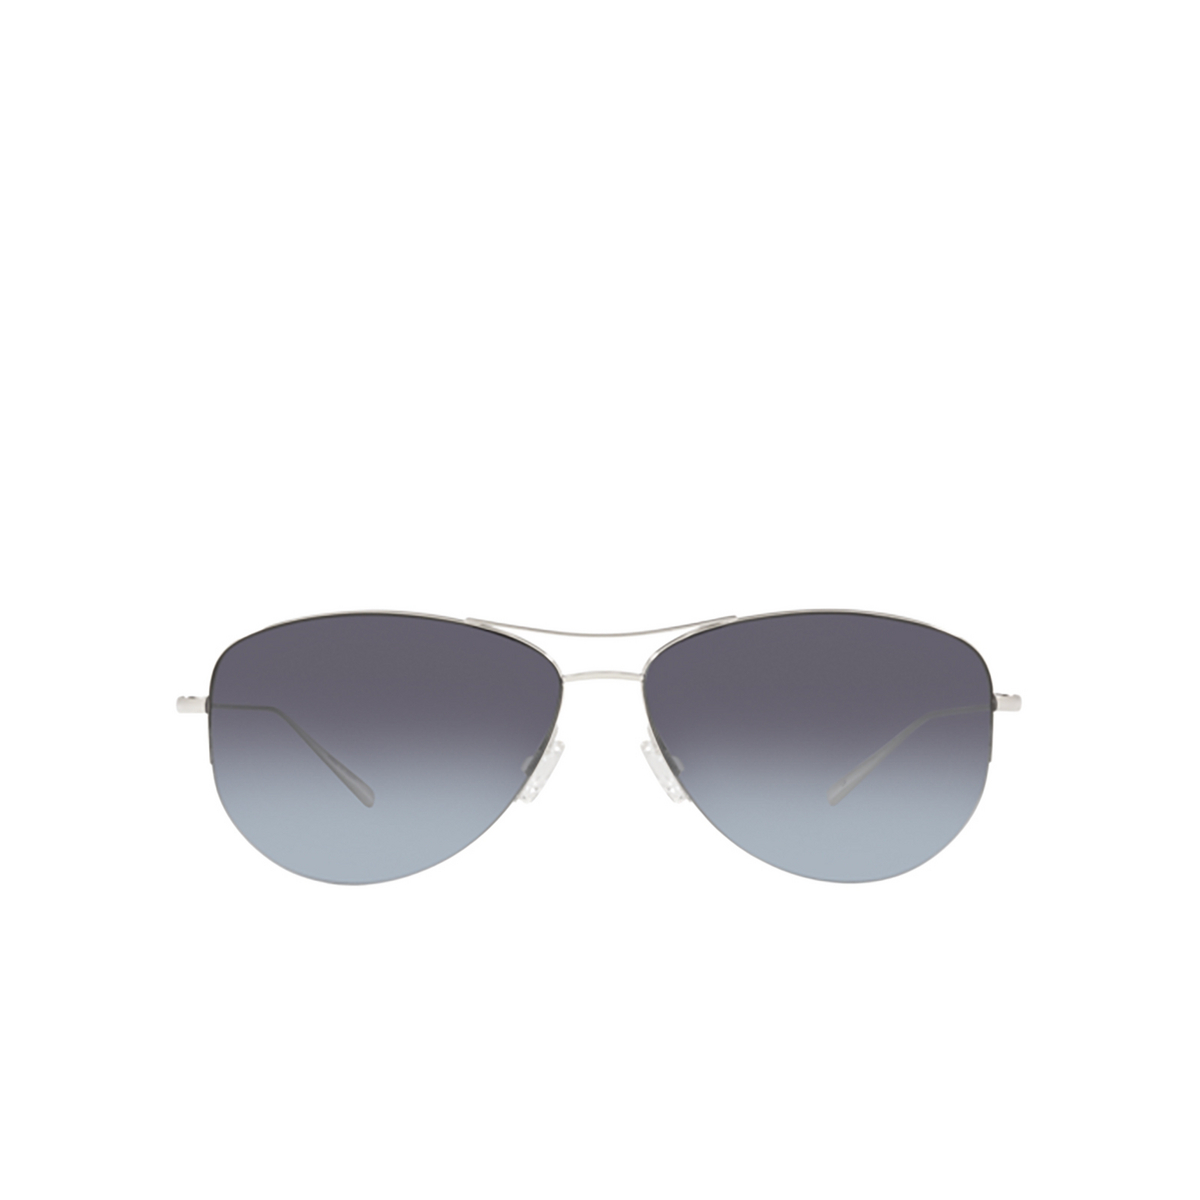 Oliver Peoples STRUMMER Sunglasses S Silver - front view